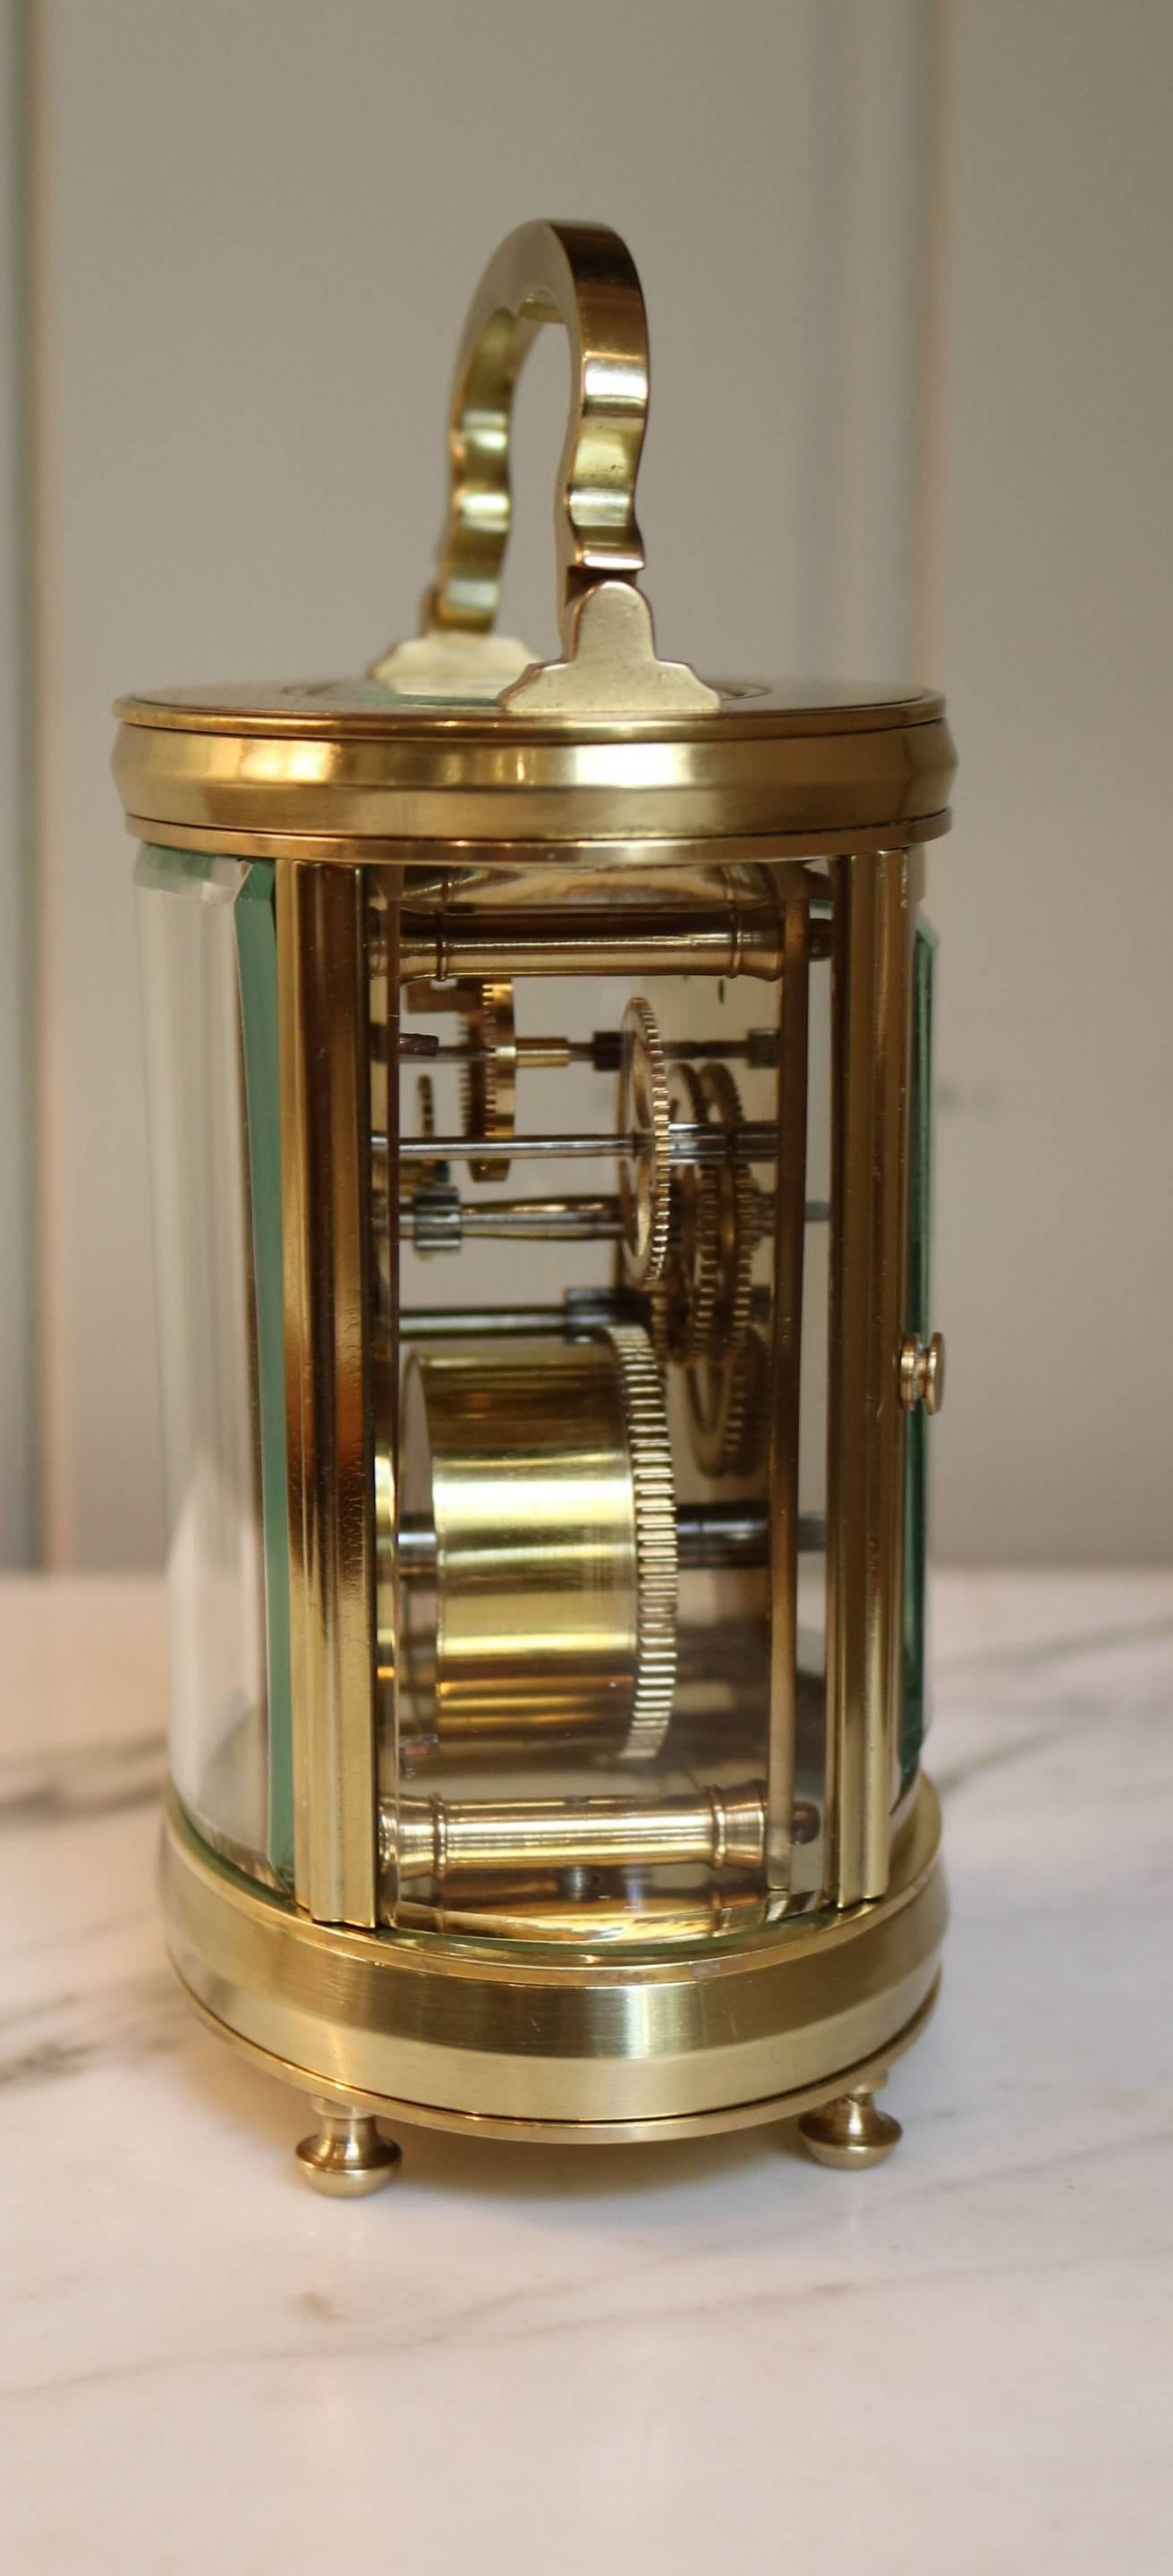 A French brass carriage clock in the more unusual oval form. The brass case has a shaped top handle and bevel edge glass around and in the top window. It has an enamel dial and an 8 day timepiece movement with a cylinder platform. The backplate has